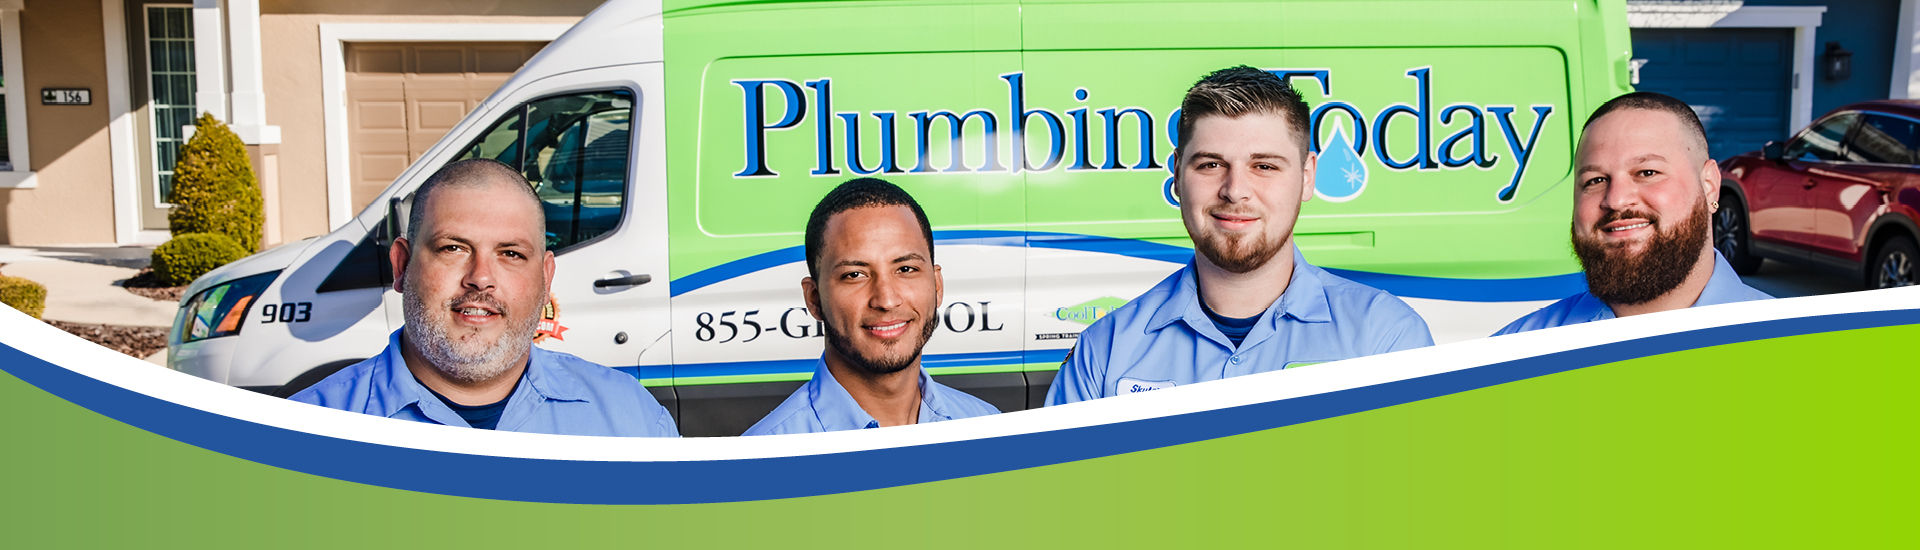 Plumbers in front of a service vehicle